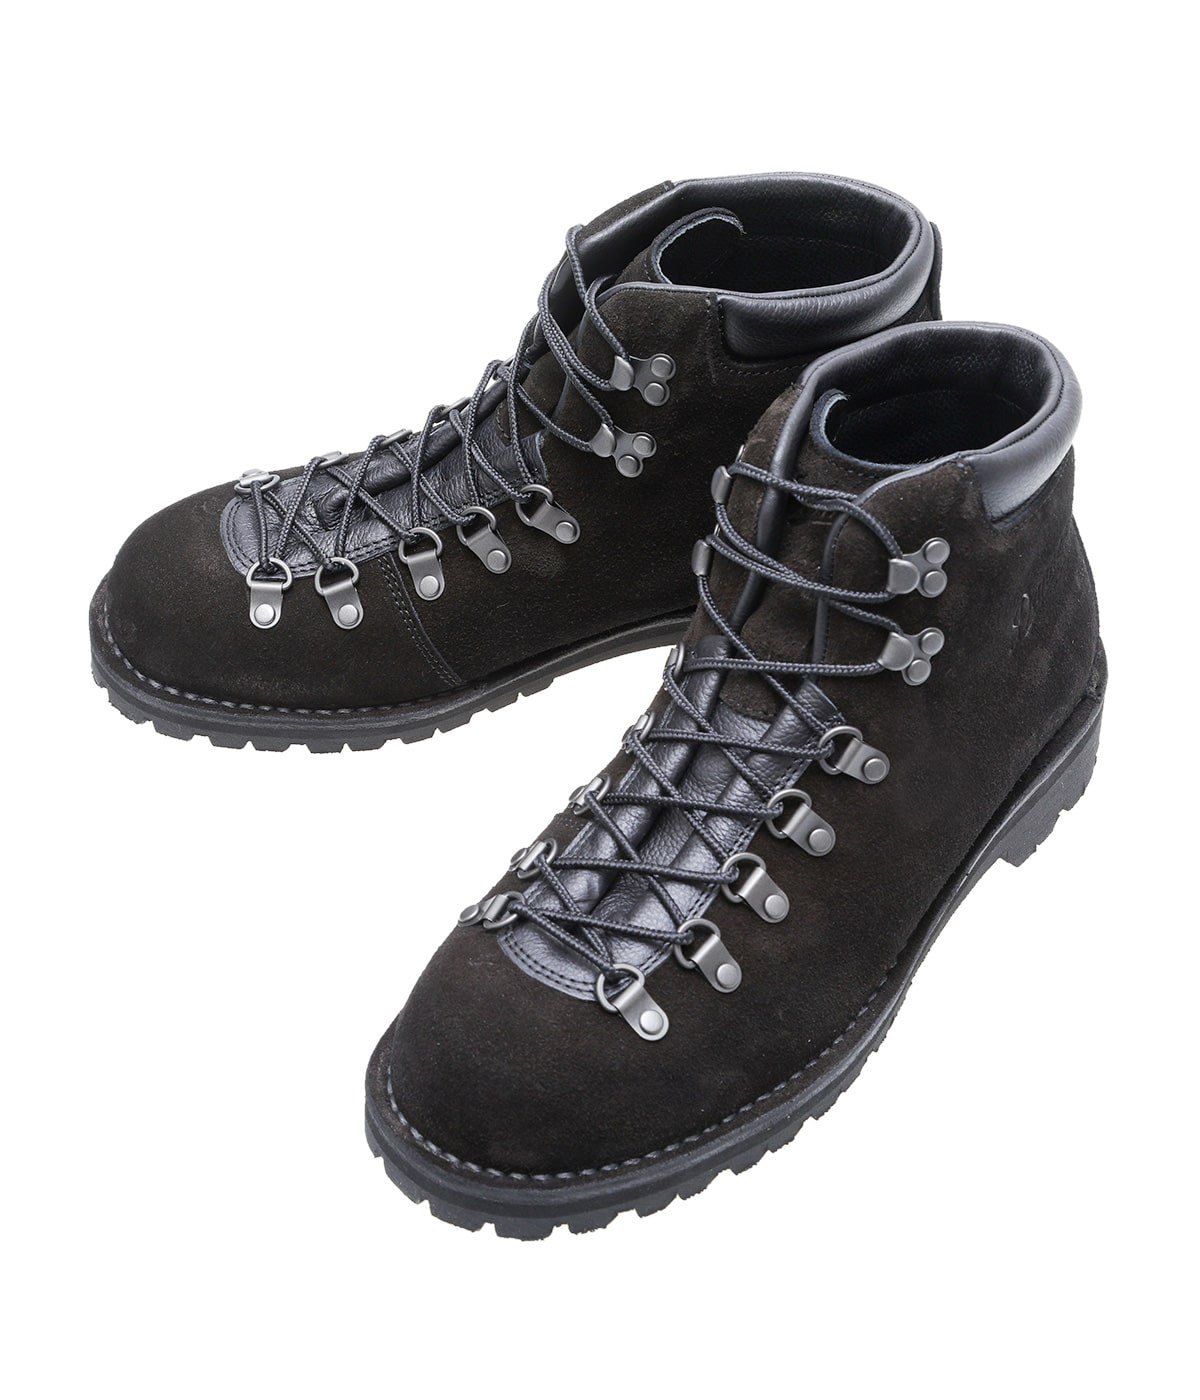 【ONLY ARK】別注 Mountain boots